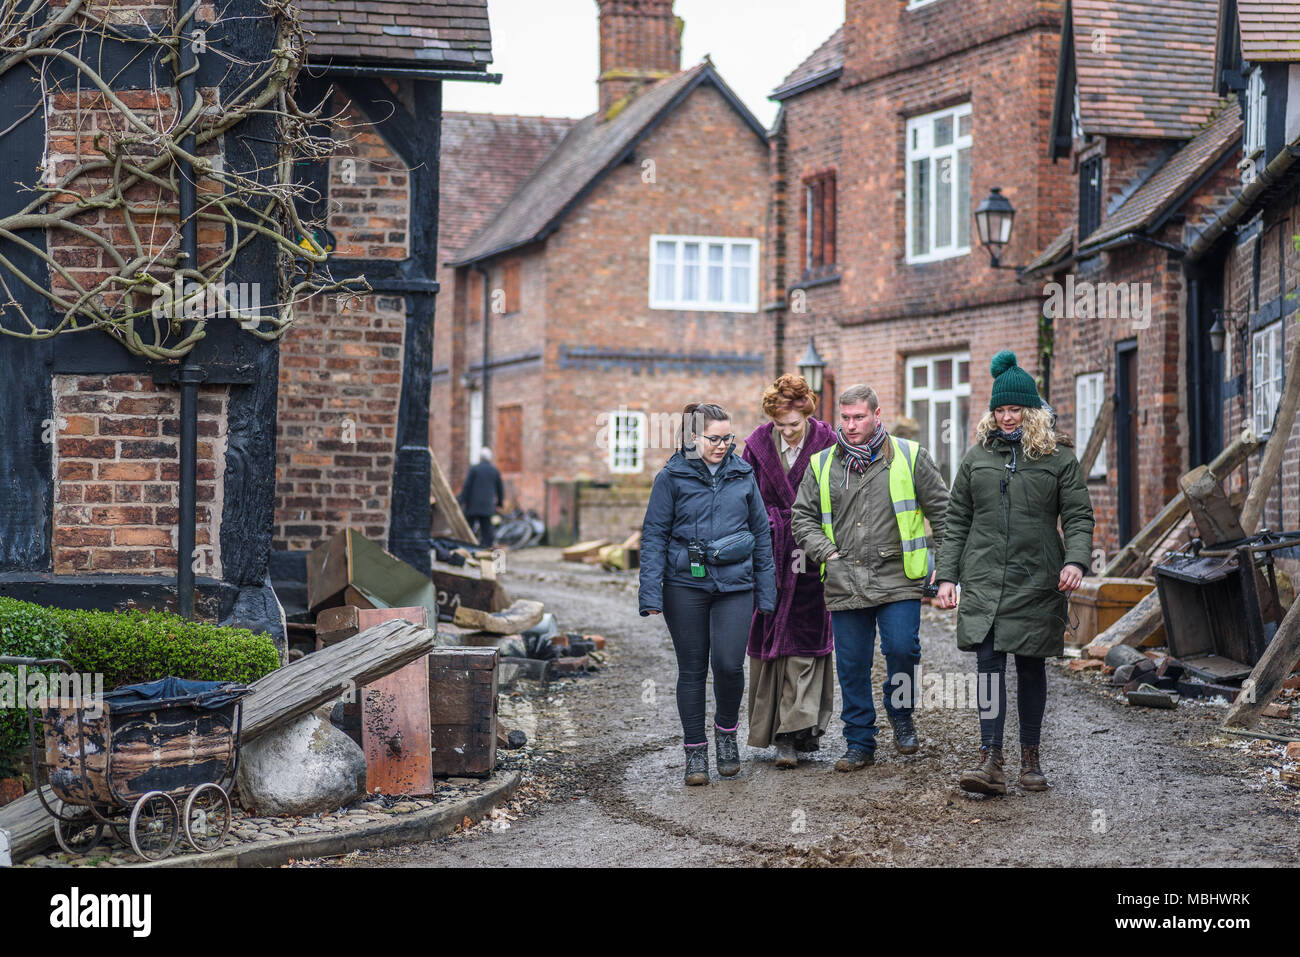 Great Budworth, UK. 11th April, 2018. Actor Eleanor Tomlinson (Amy)  and assistants walk onto set in the new BBC drama 'War Of The Worlds' by HG Wells, filmed in the streets of Great Budworth village, Cheshire on Wednesday afternoon, April 11th. Credit: Ian Hubball/Alamy Live News Stock Photo